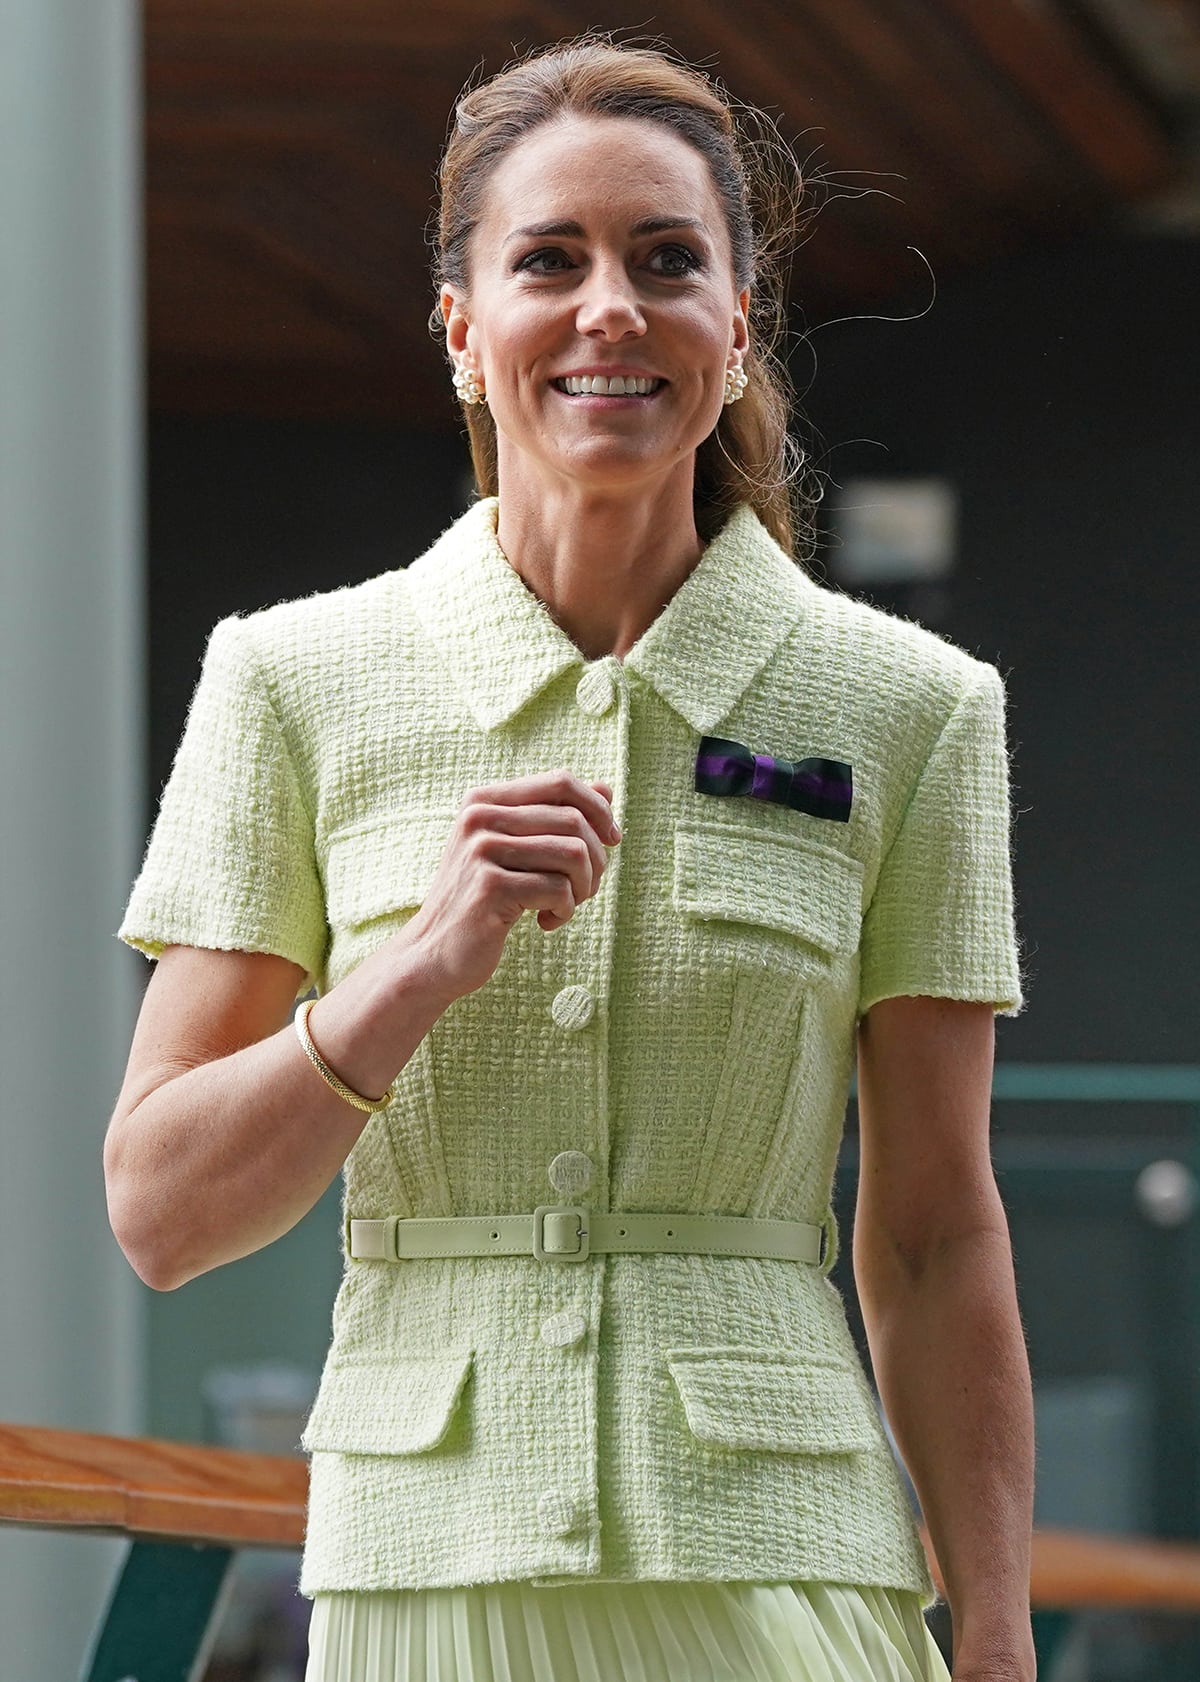 Kate Middleton, the patron of All England Lawn Tennis and Croquet Club, wears a bow pin in dark green and purple colors representing the AELTC